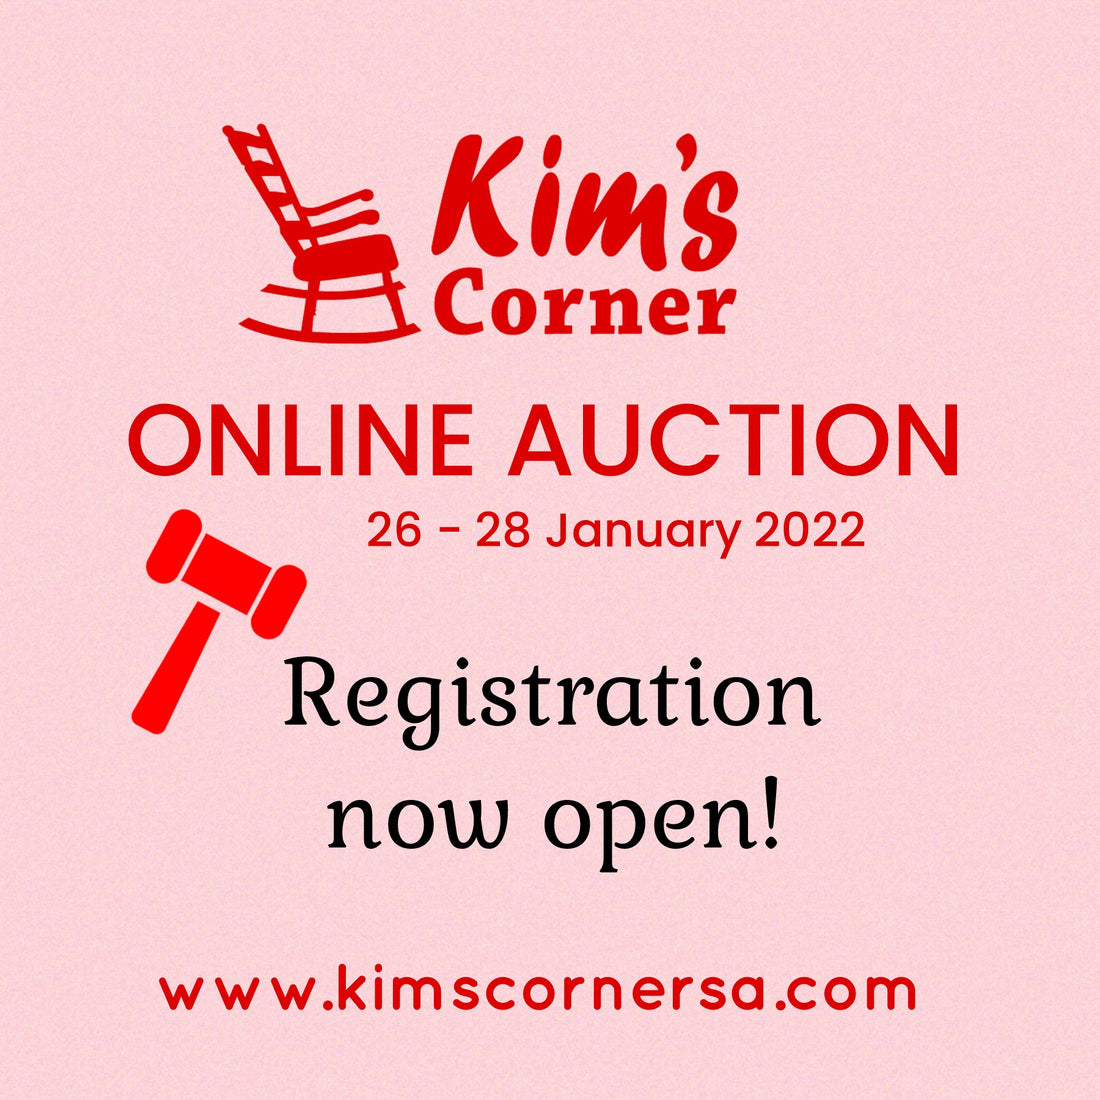 Registration now open for this Week's online auction!